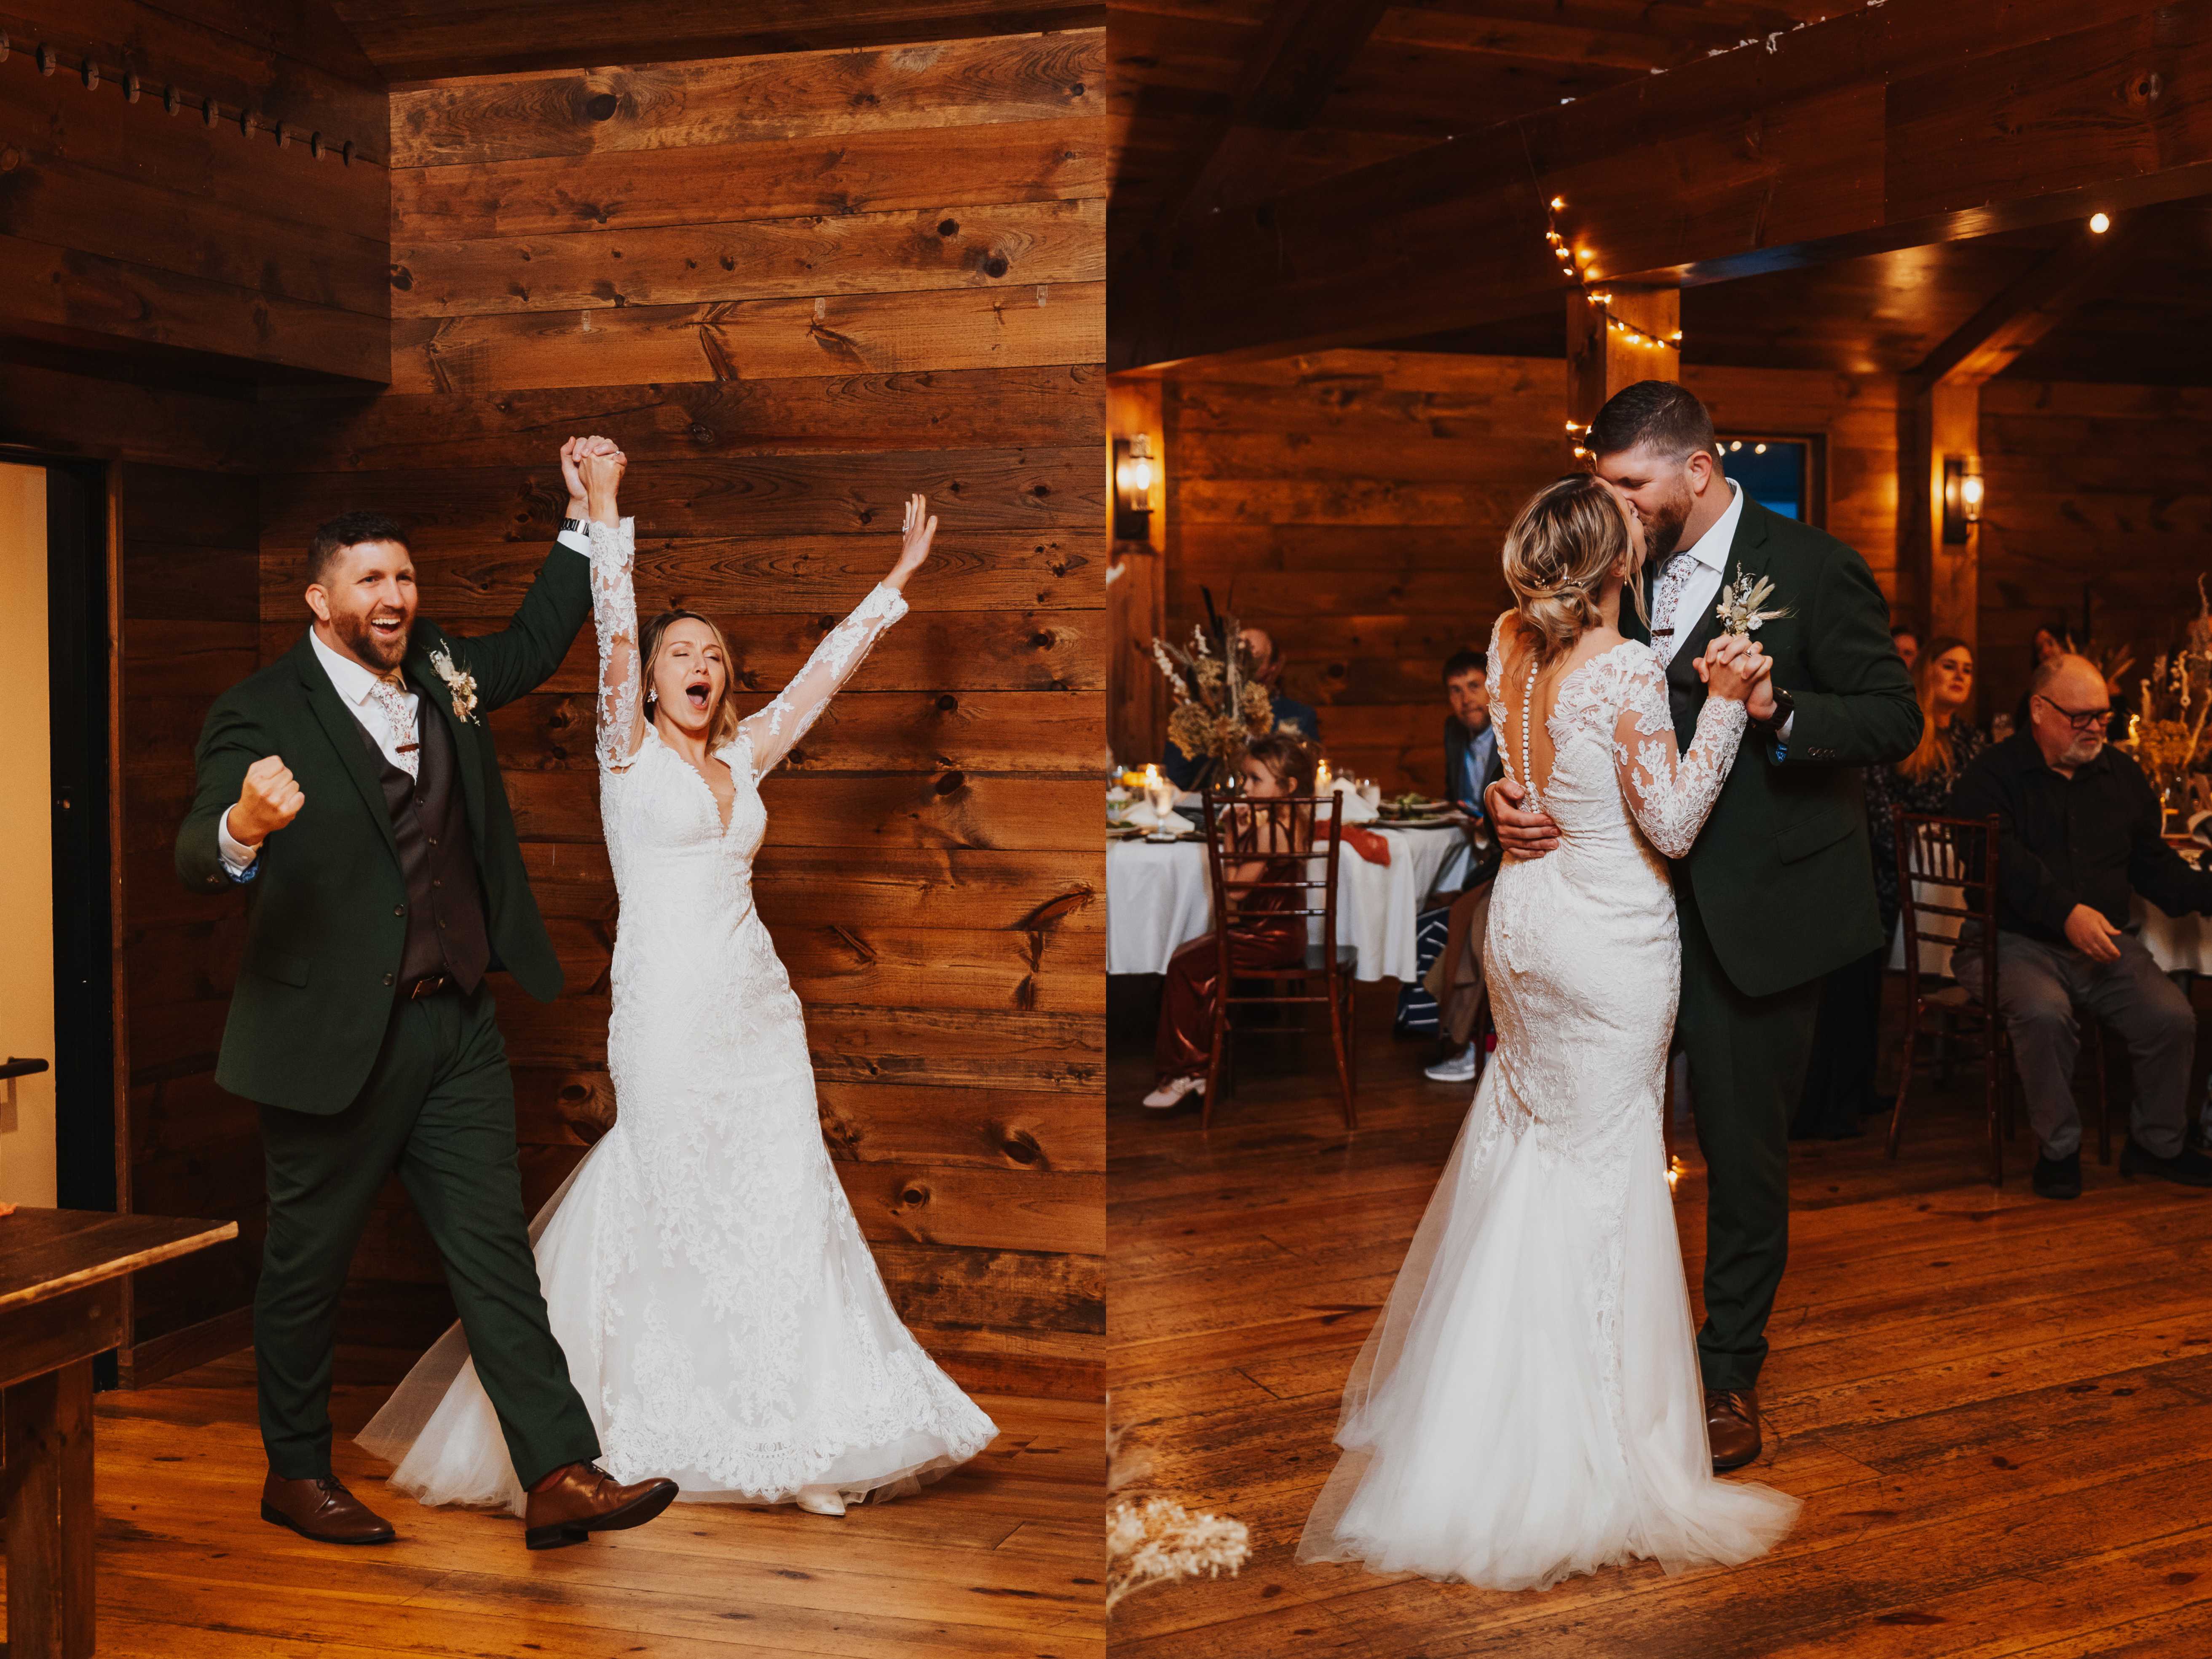 2 photos side by side, the left is of a bride and groom cheering as they enter their reception space, the right is of them kissing as they dance upon entering the space